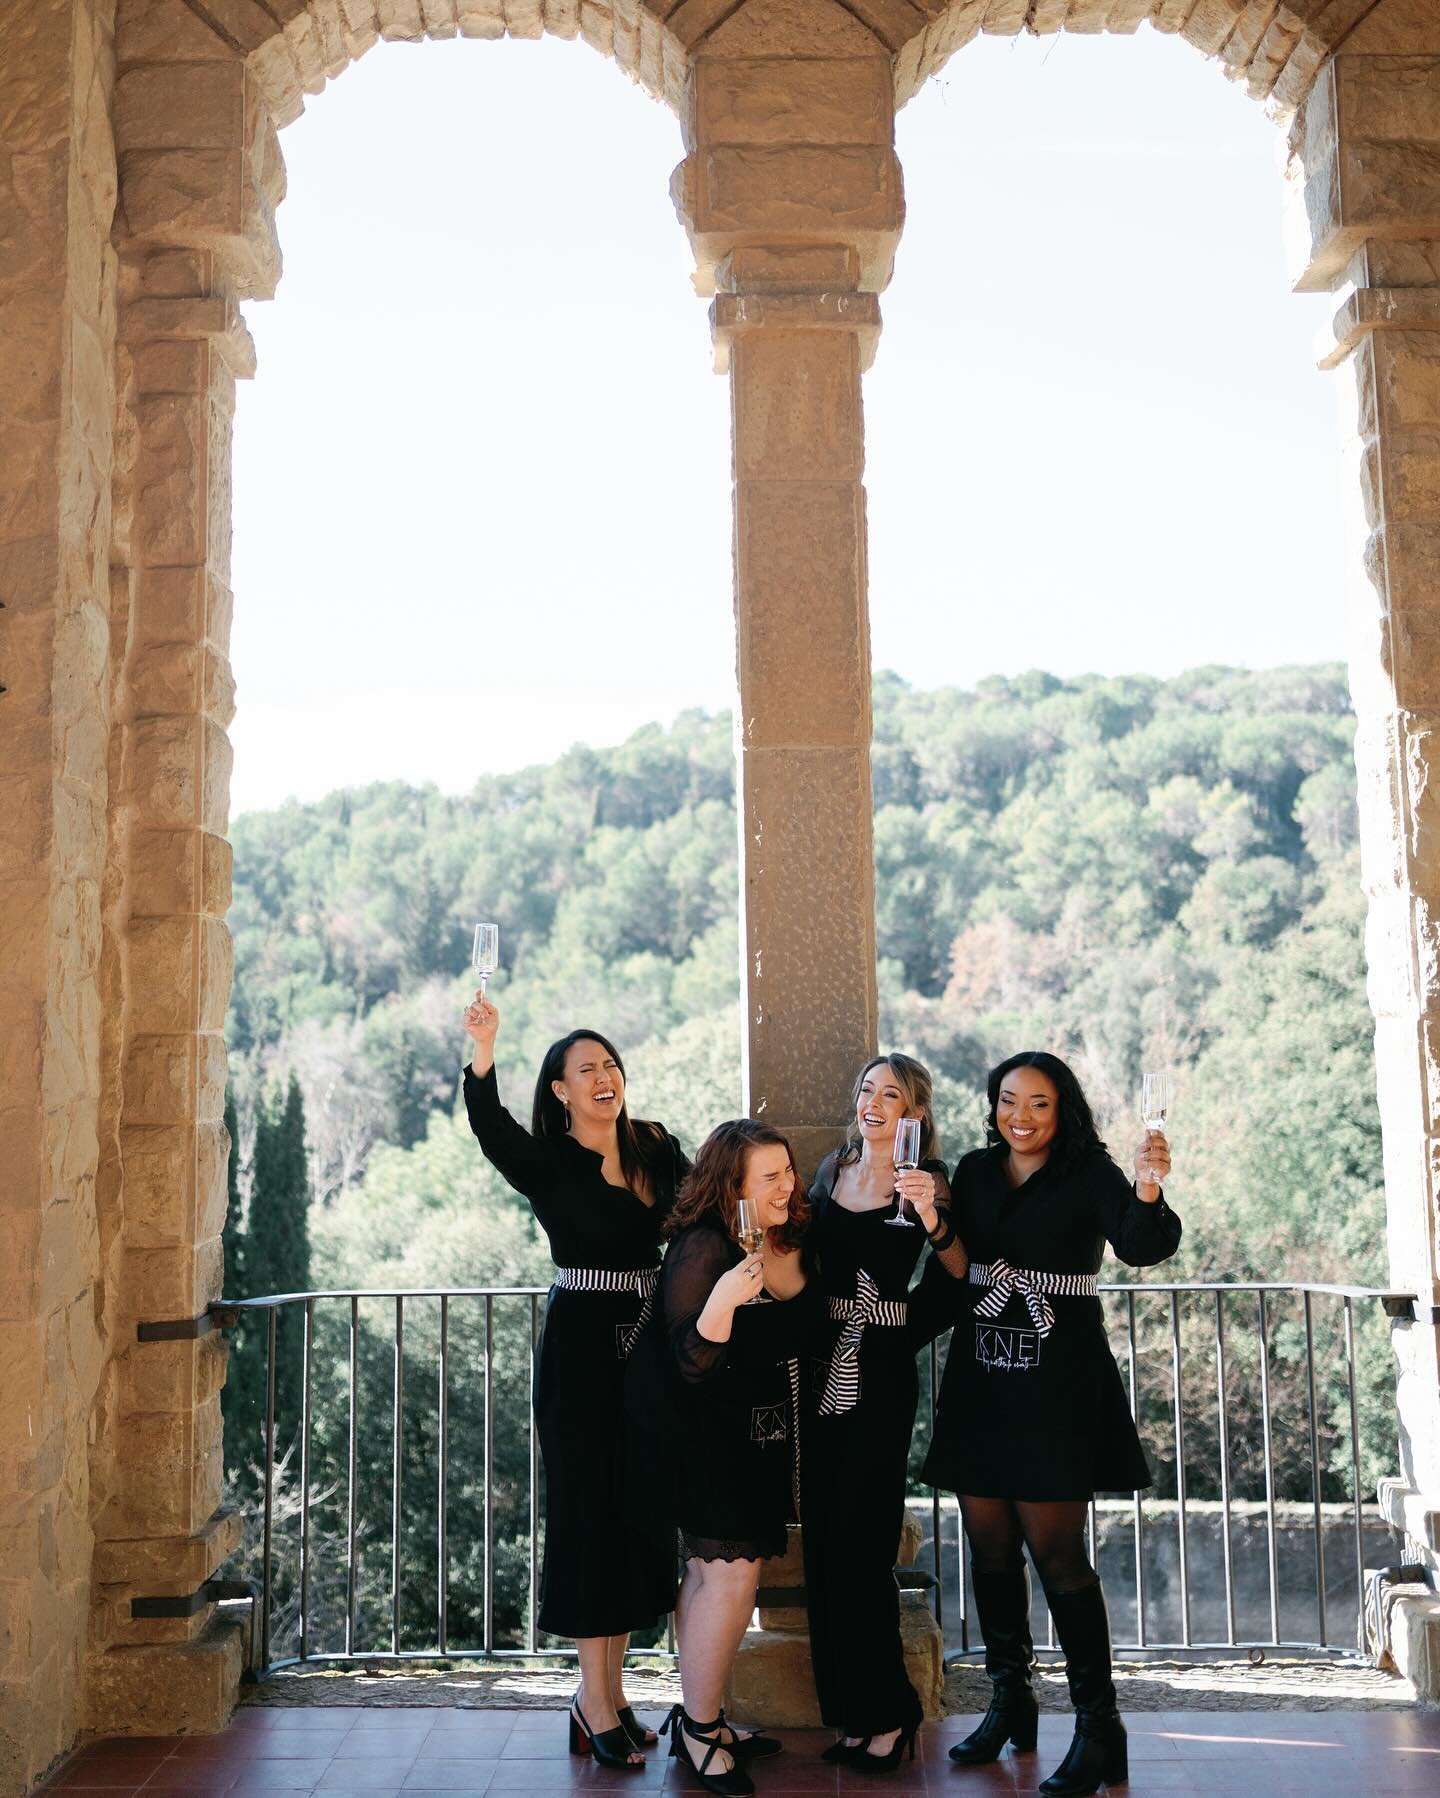 First look at our annual company meeting, this year in Spain! ✨🖤 I&rsquo;m extremely proud to have these women on my team, and not only because they plan and design BADASS destination weddings&hellip;but because they are fundamentally kind, empoweri